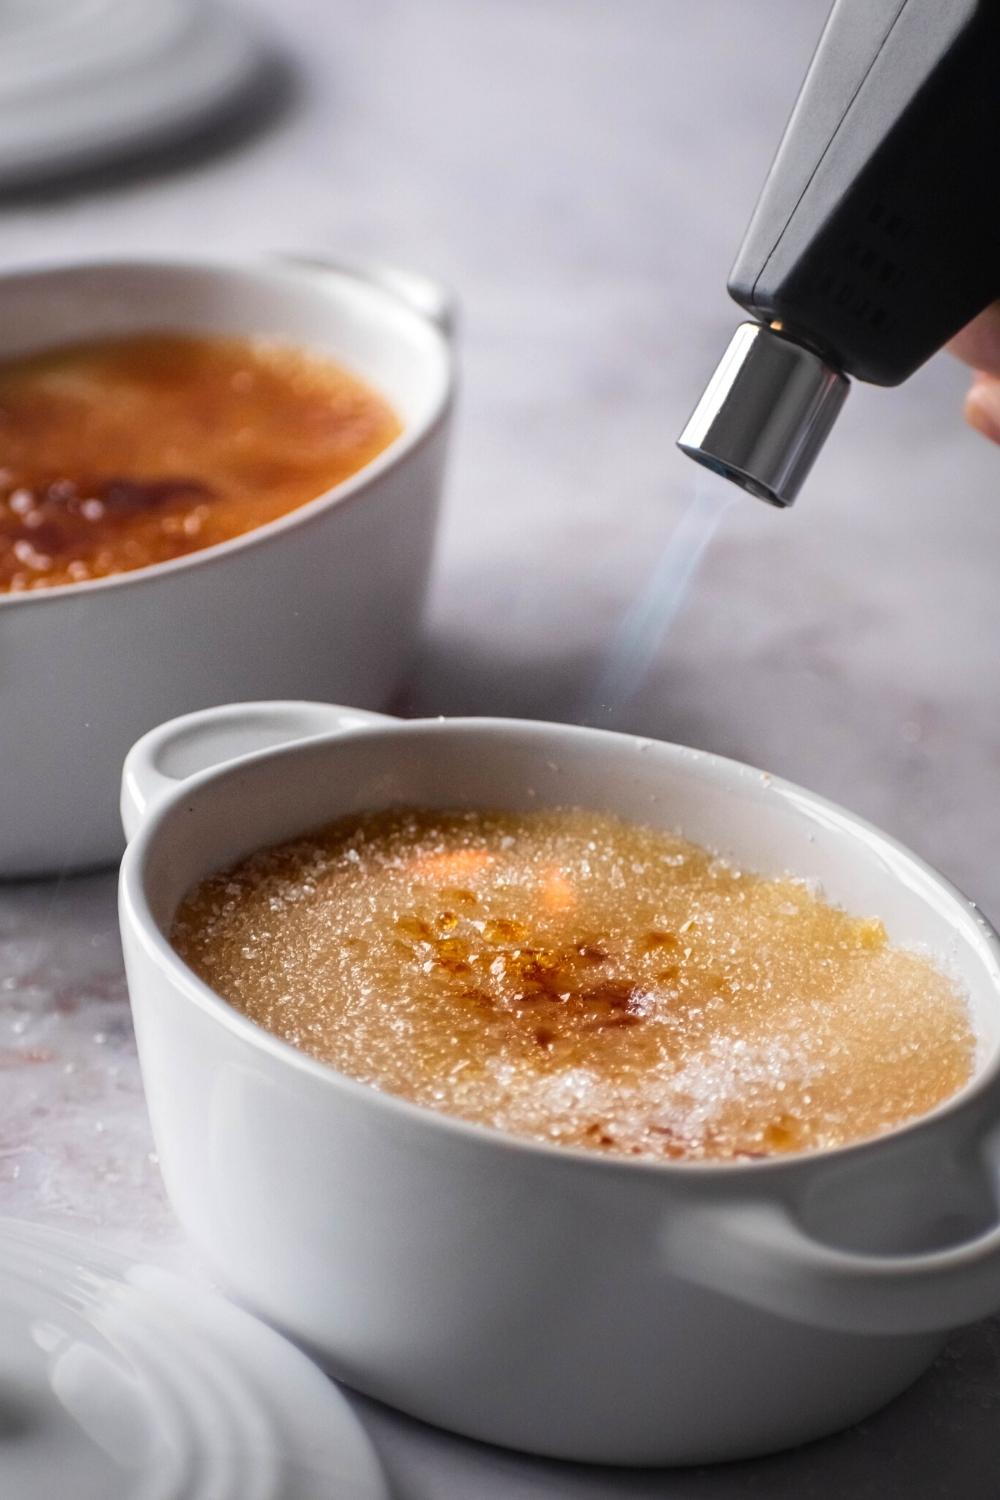 A blow torch torch in the top of crème brûlée in a white ramekin. Behind that is part of another ramekin filled with crème brûlée.